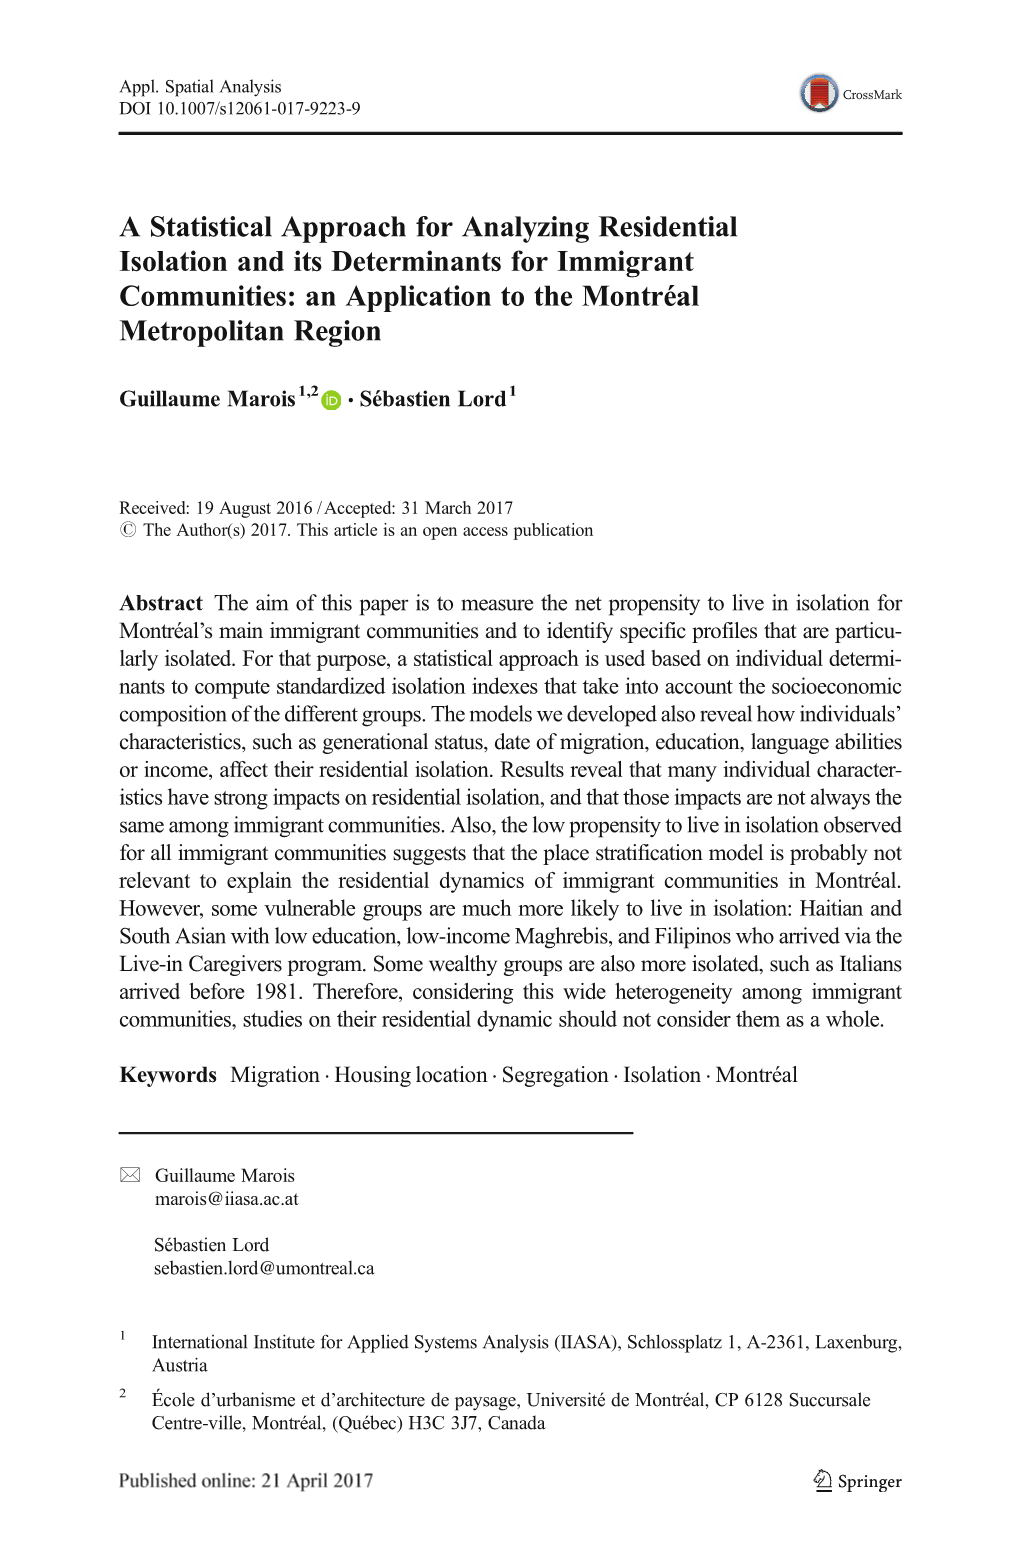 A Statistical Approach for Analyzing Residential Isolation and Its Determinants for Immigrant Communities: an Application to the Montréal Metropolitan Region